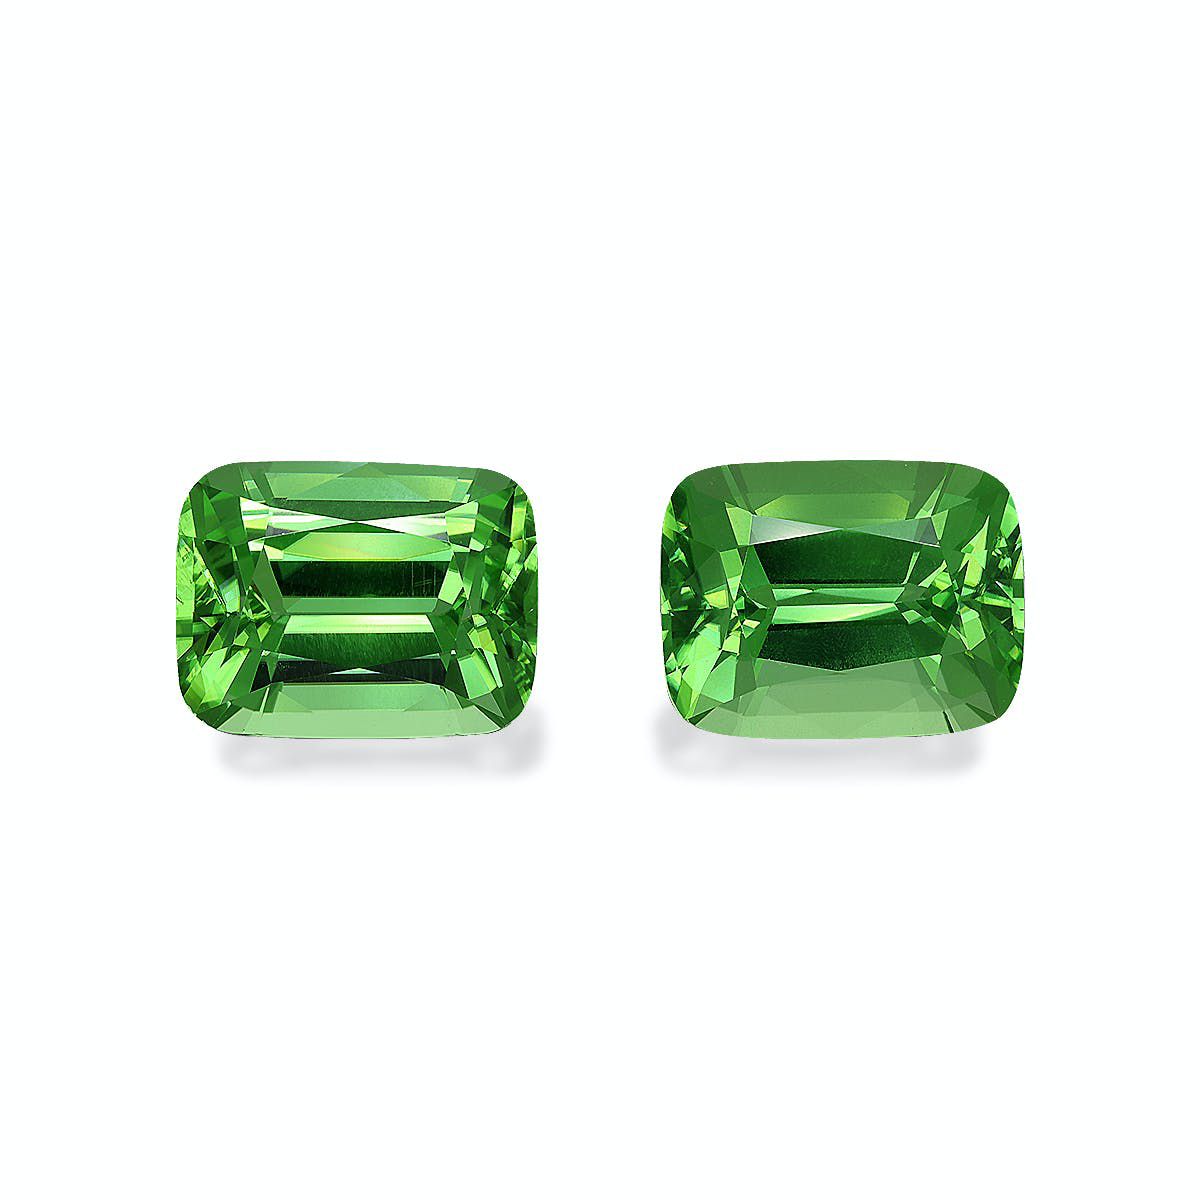 Picture of Vivid Green Peridot 27.26ct - Pair (PD0303)